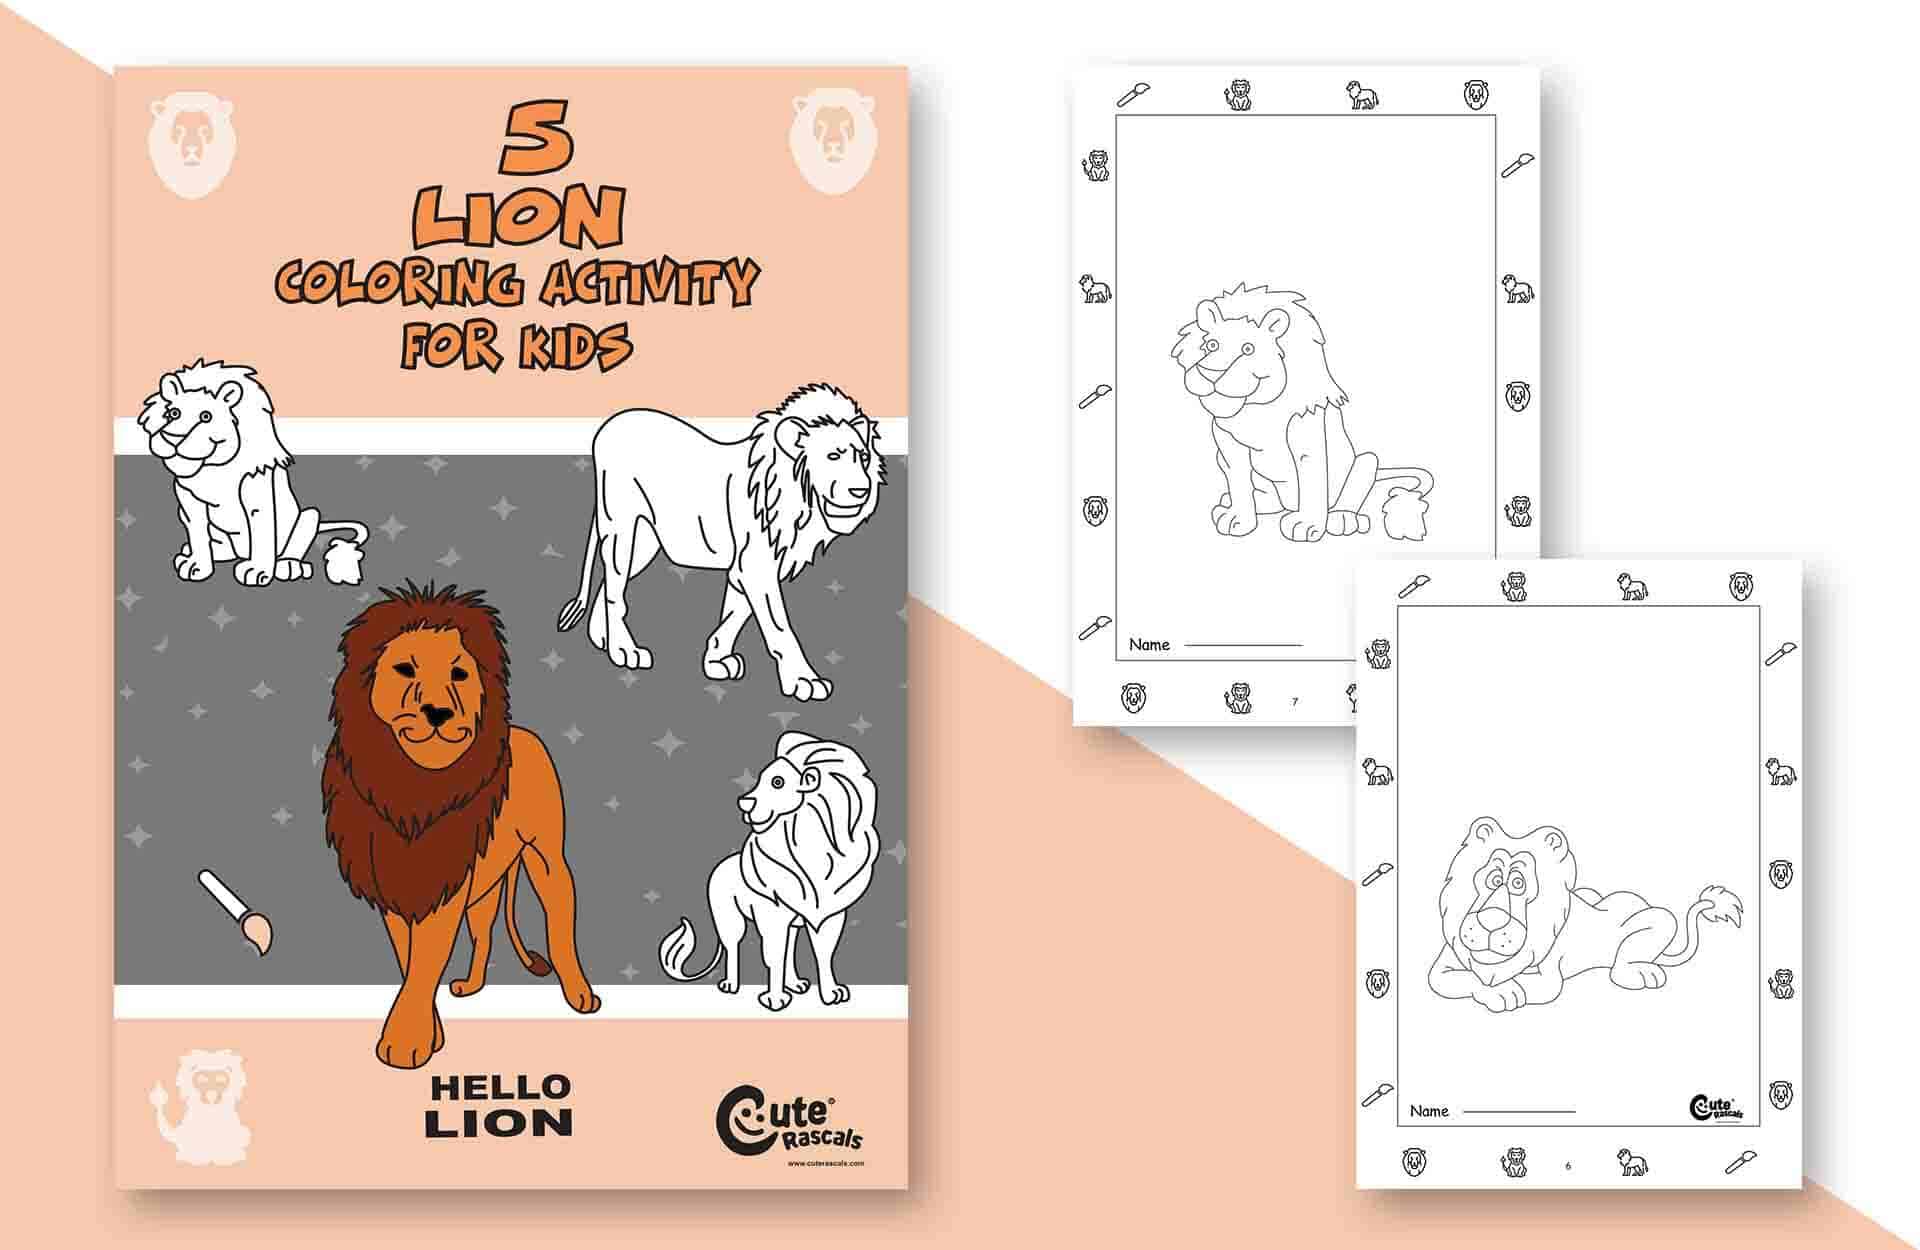 Easy 5 Lion Coloring Pages for Kids: Print and Color!